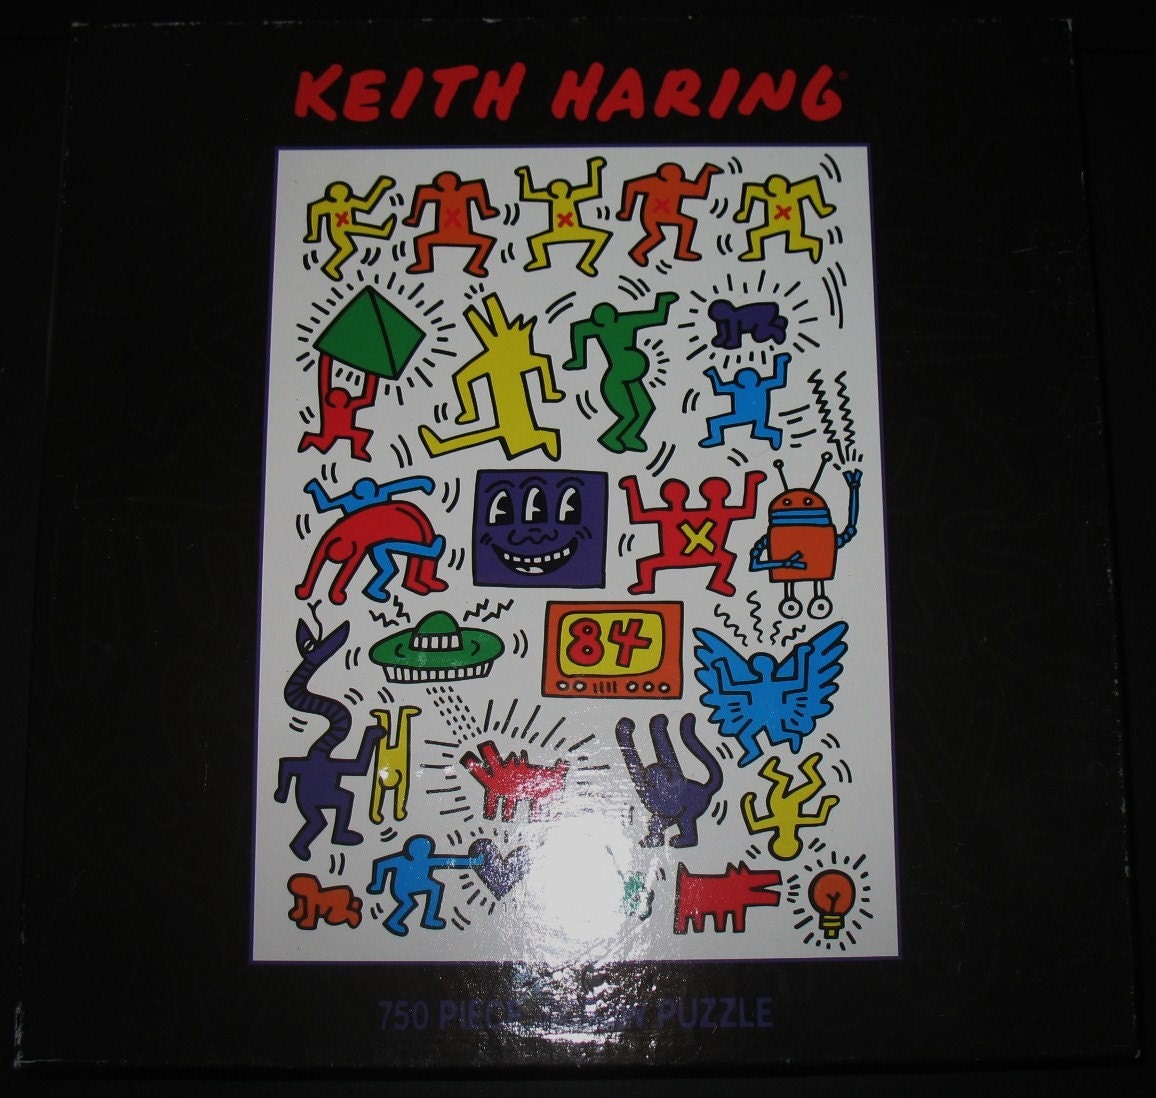 Keith Haring Pop Artist Sealed 750 Piece Jigsaw Puzzle From a 1983 Exhibition Poster